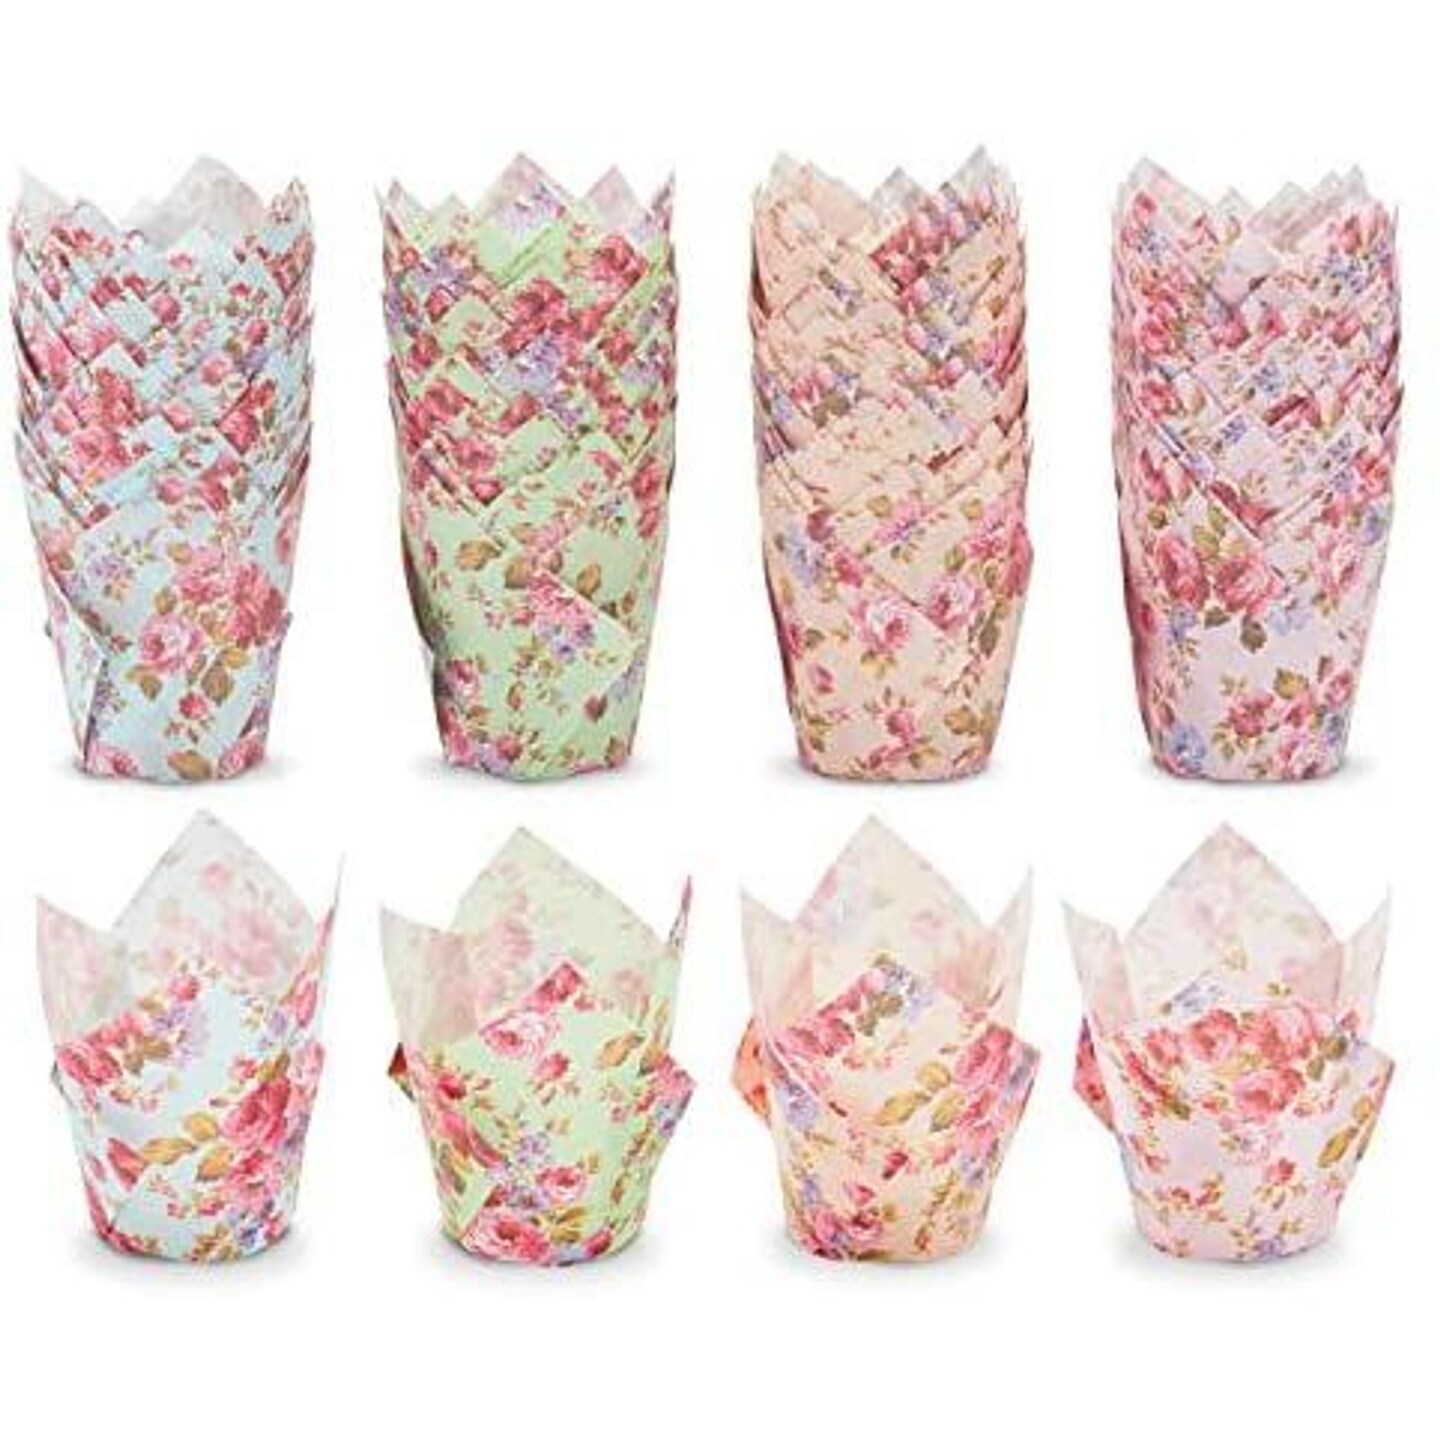 200 Pack Tulip Cupcake Liners, Floral Baking Cups for Birthdays, Weddings, Baby Showers, Spring Events &#x26; Bake Sales